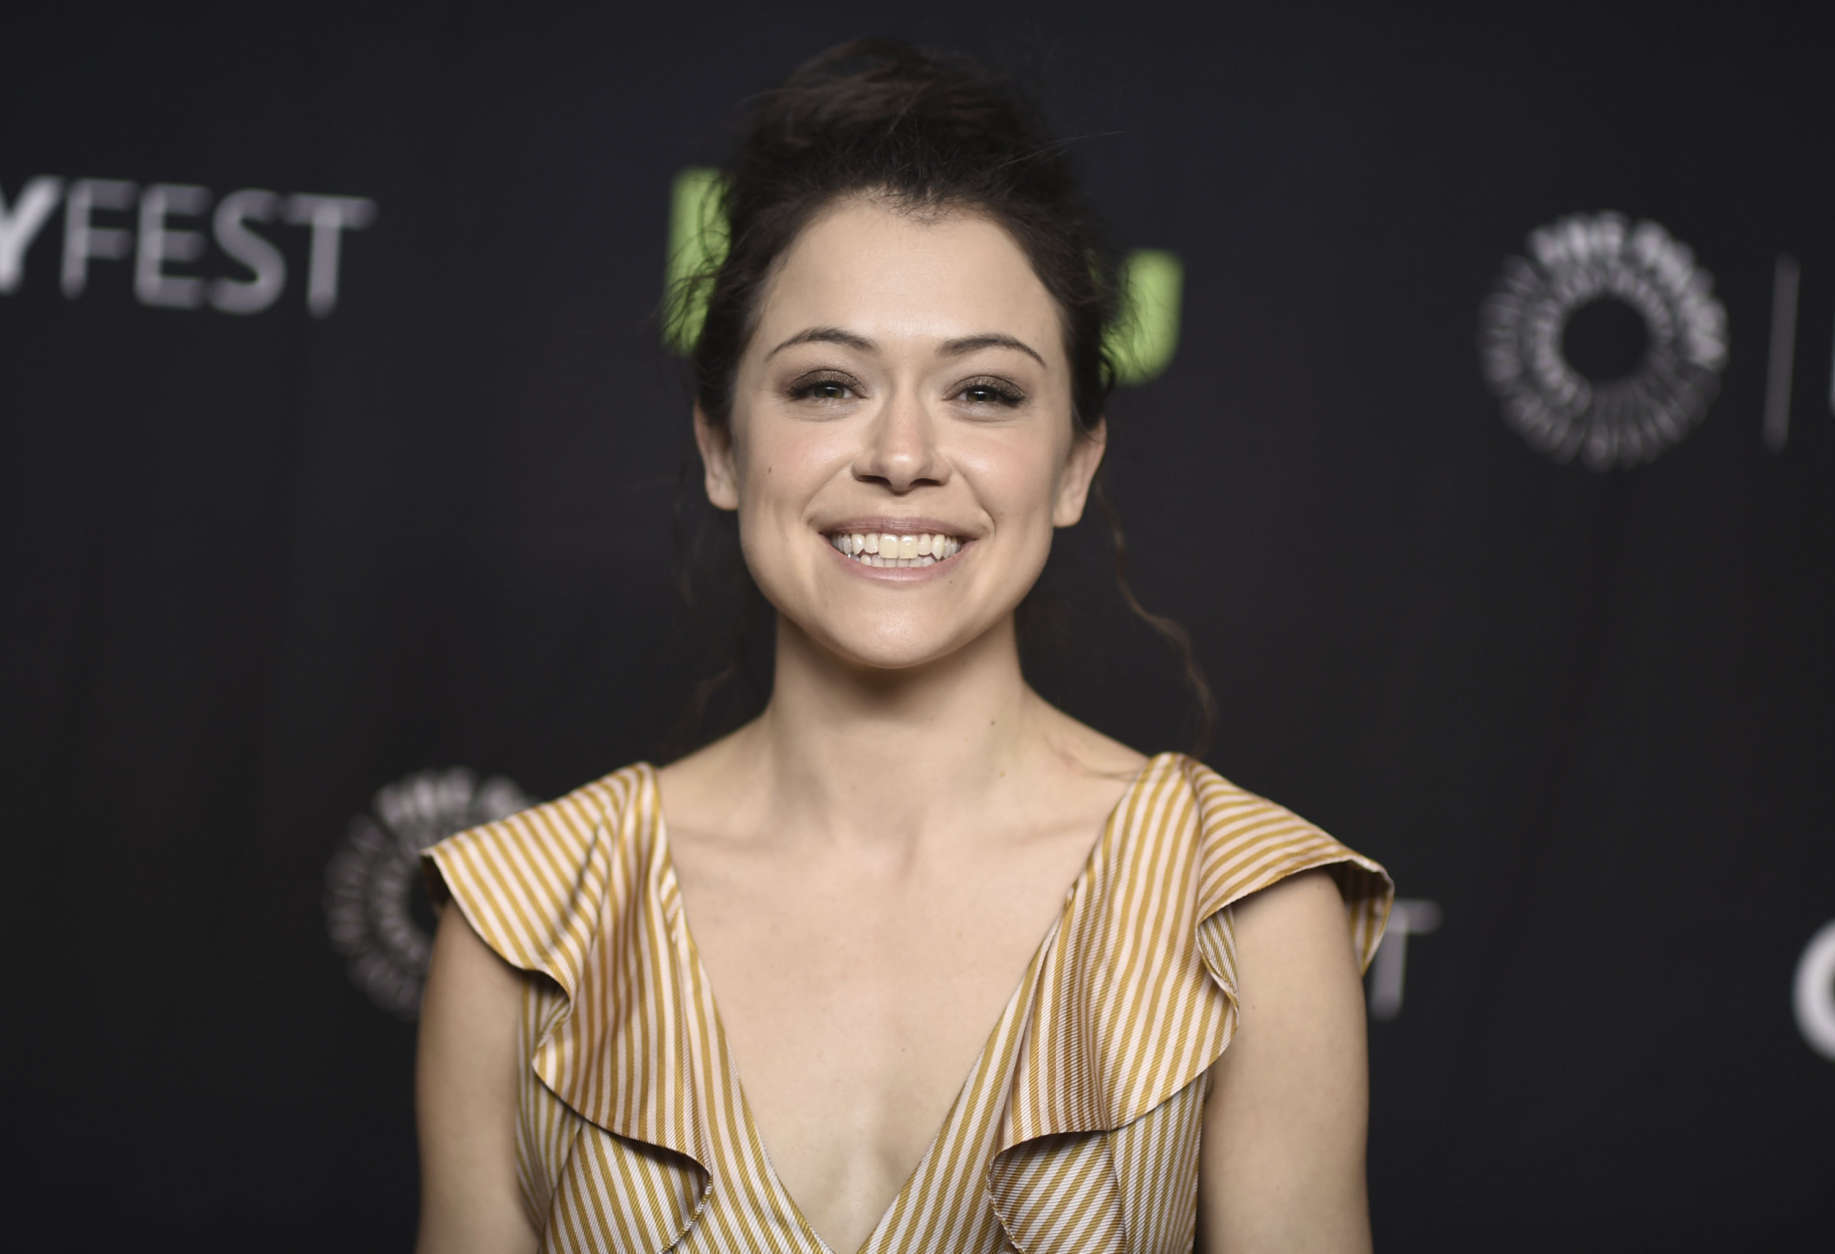 Tatiana Maslany attends the 34th annual PaleyFest: "Orphan Black" event at the Dolby Theatre on Thursday, March 23, 2017, in Los Angeles. (Photo by Richard Shotwell/Invision/AP)